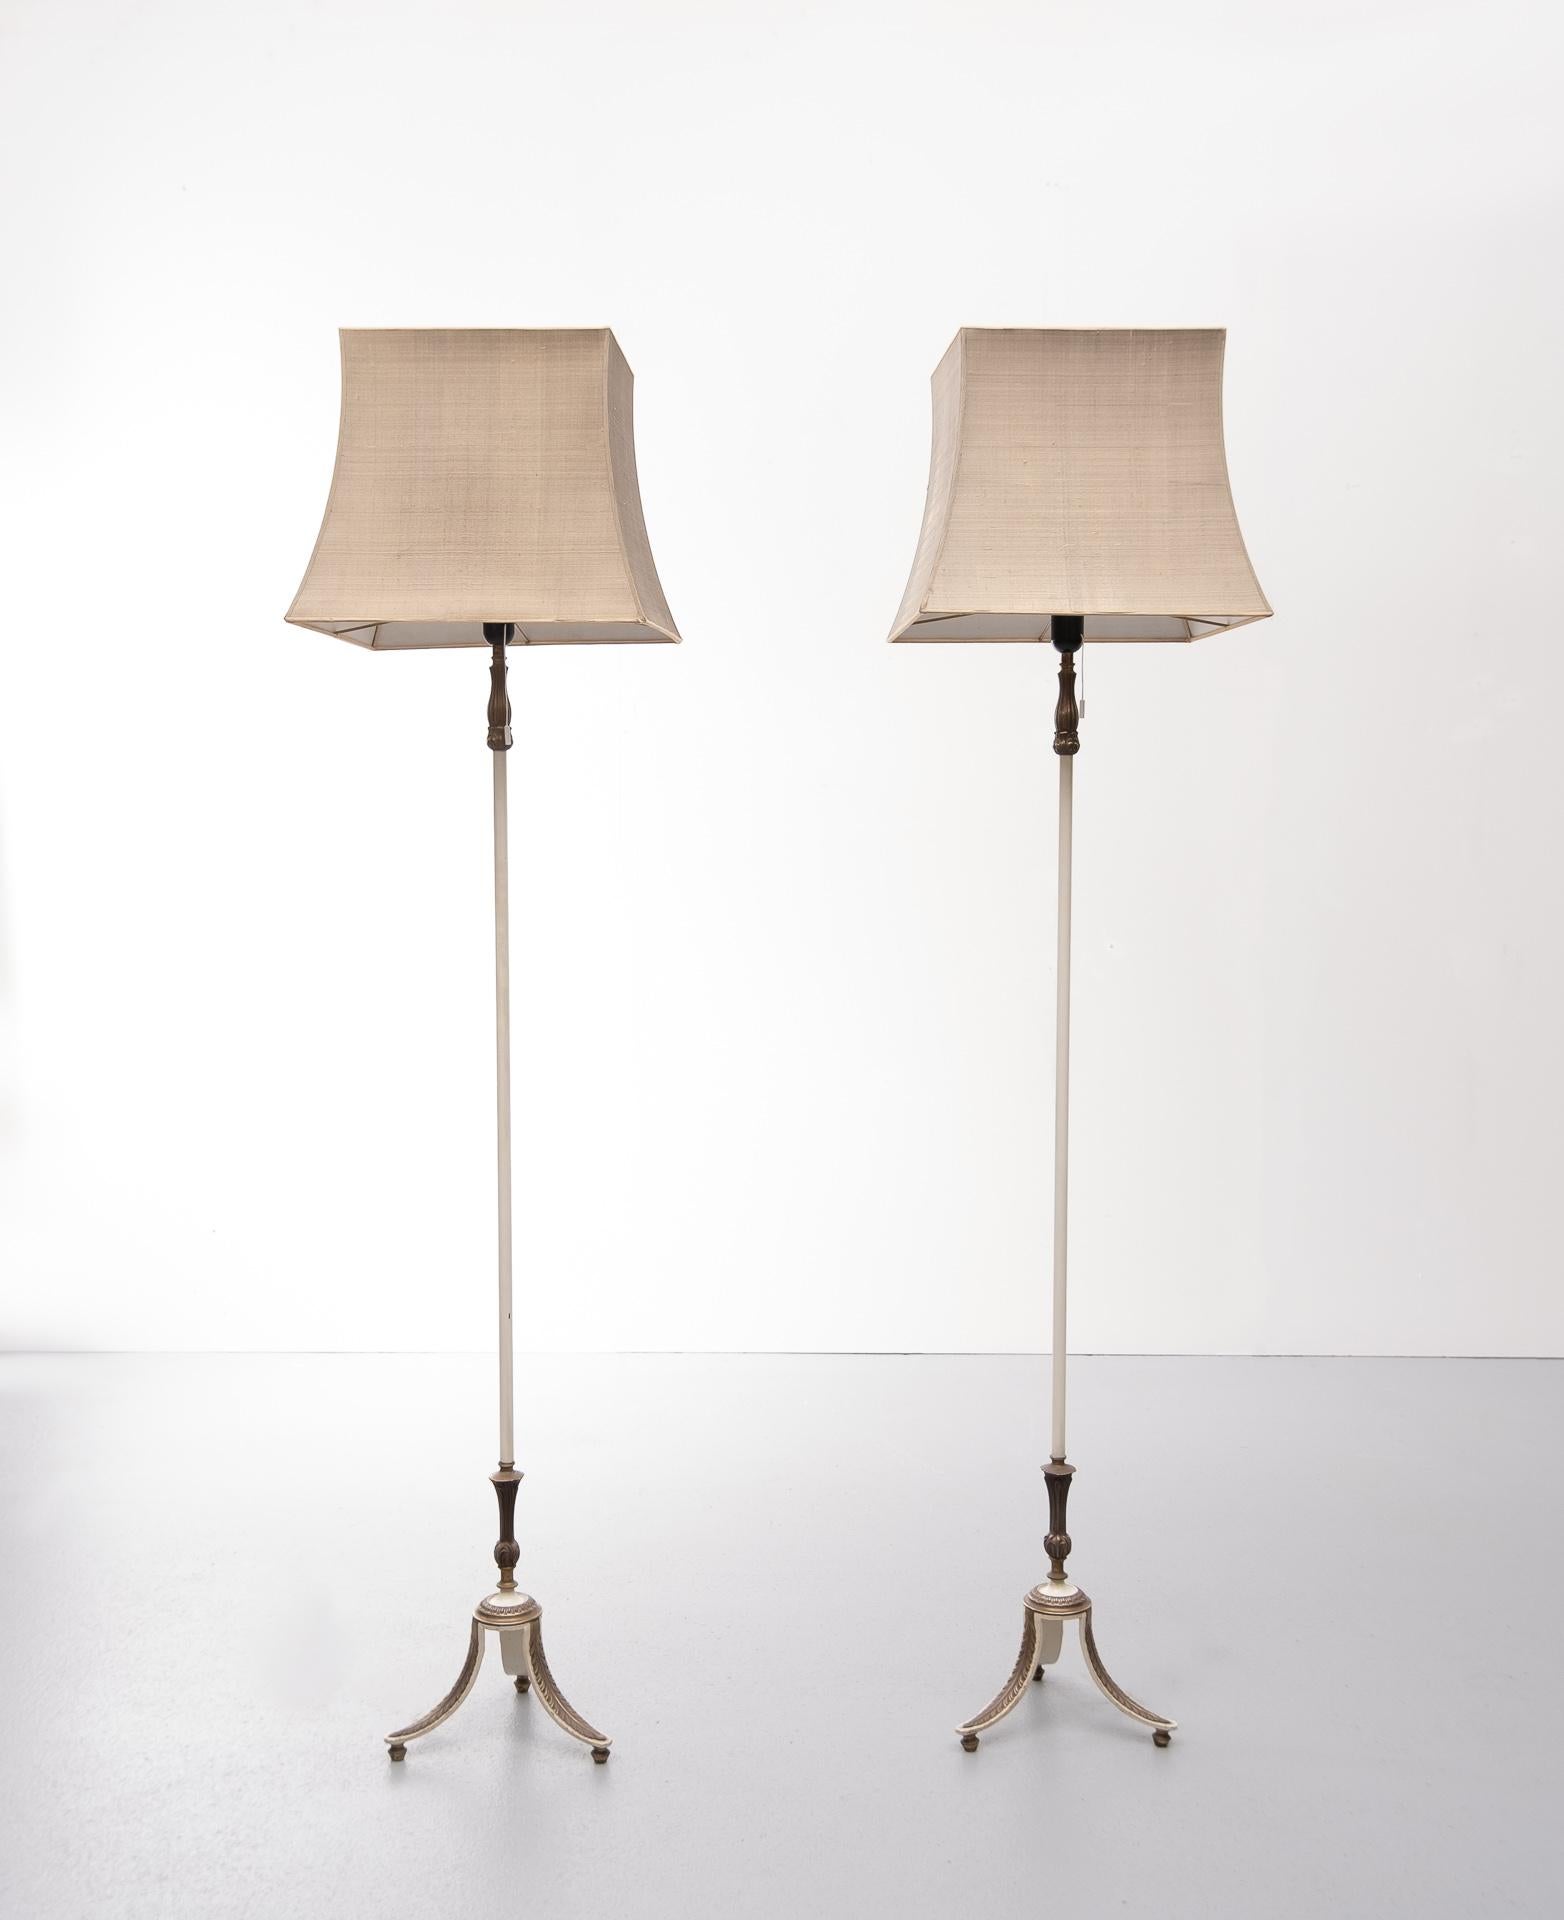 2 very nice elegant French floor lamps. White metal uprights with brass leafs and details. Tripod feet
comes with beautiful vintage silk shades. Pull down switch. Superb set, 1950s.